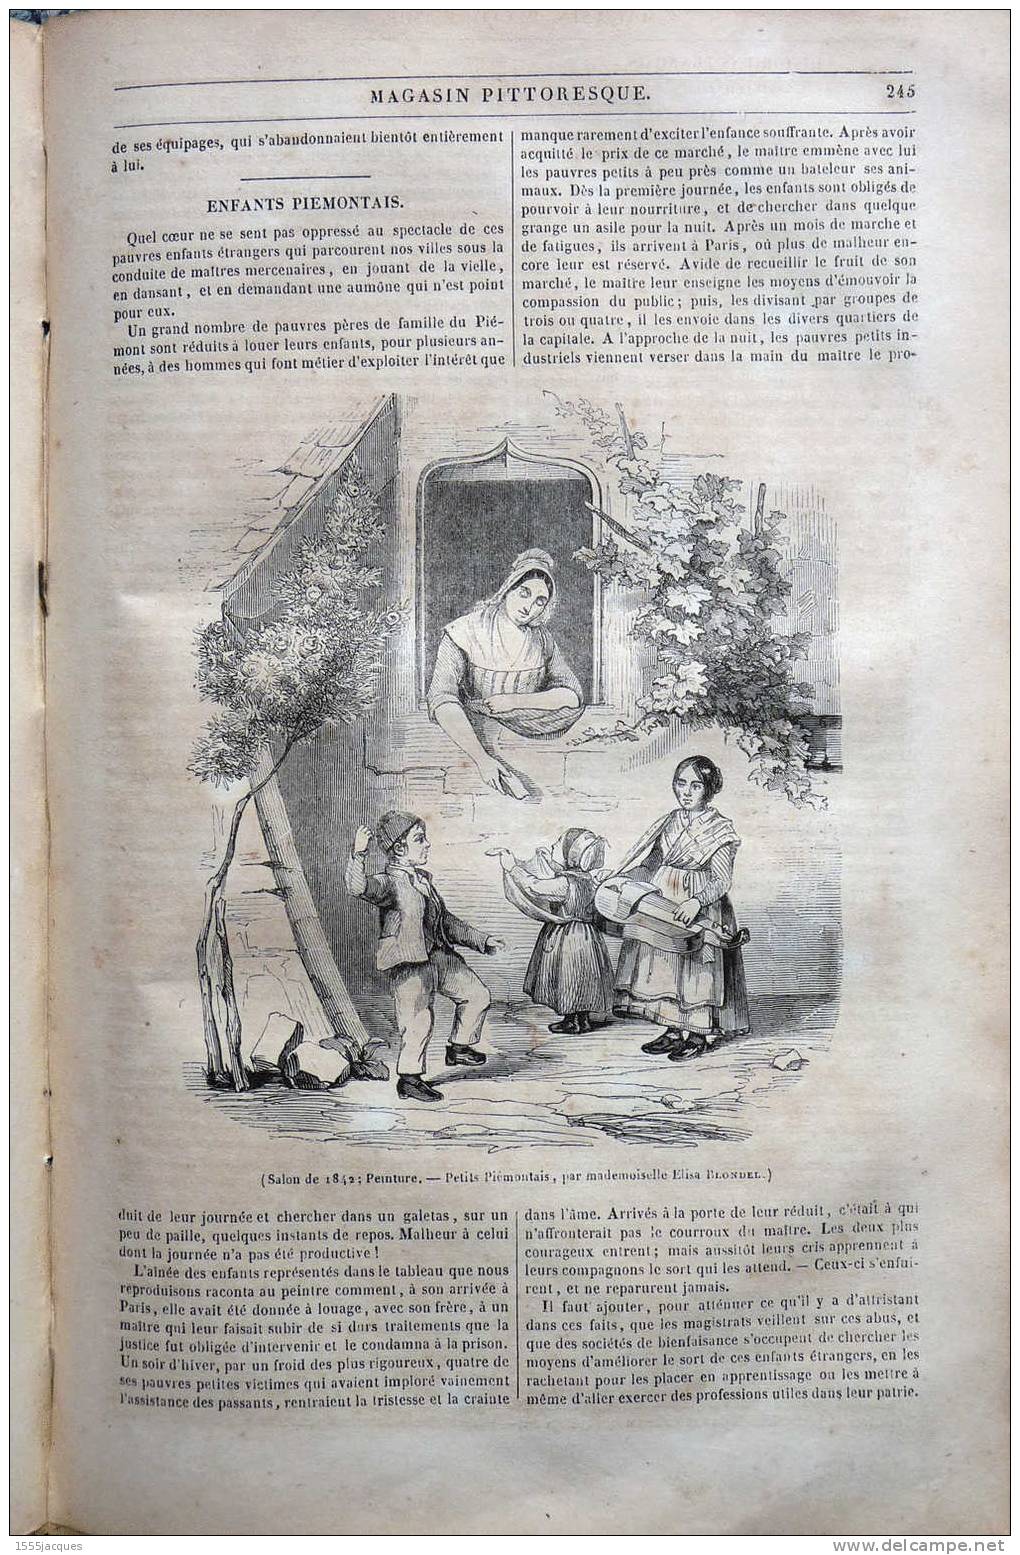 LE MAGASIN PITTORESQUE - JUIL 1842 - N°31 : CEYLAN DENT BOUDDHA - PIEMONT - FONTAINE MAYENCE - - 1800 - 1849